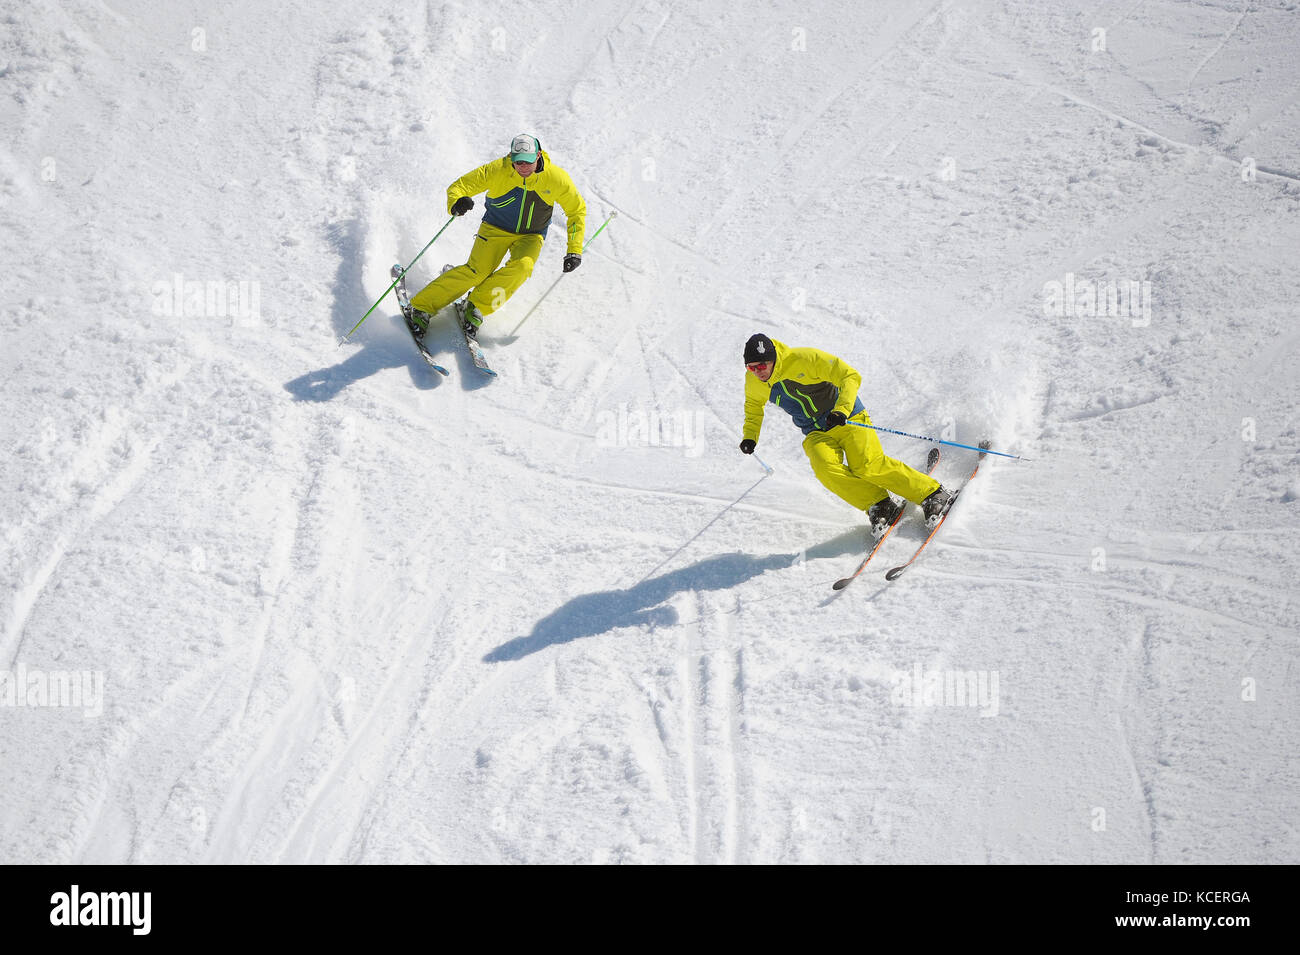 Two skiers carve turns photographed from above. Stock Photo